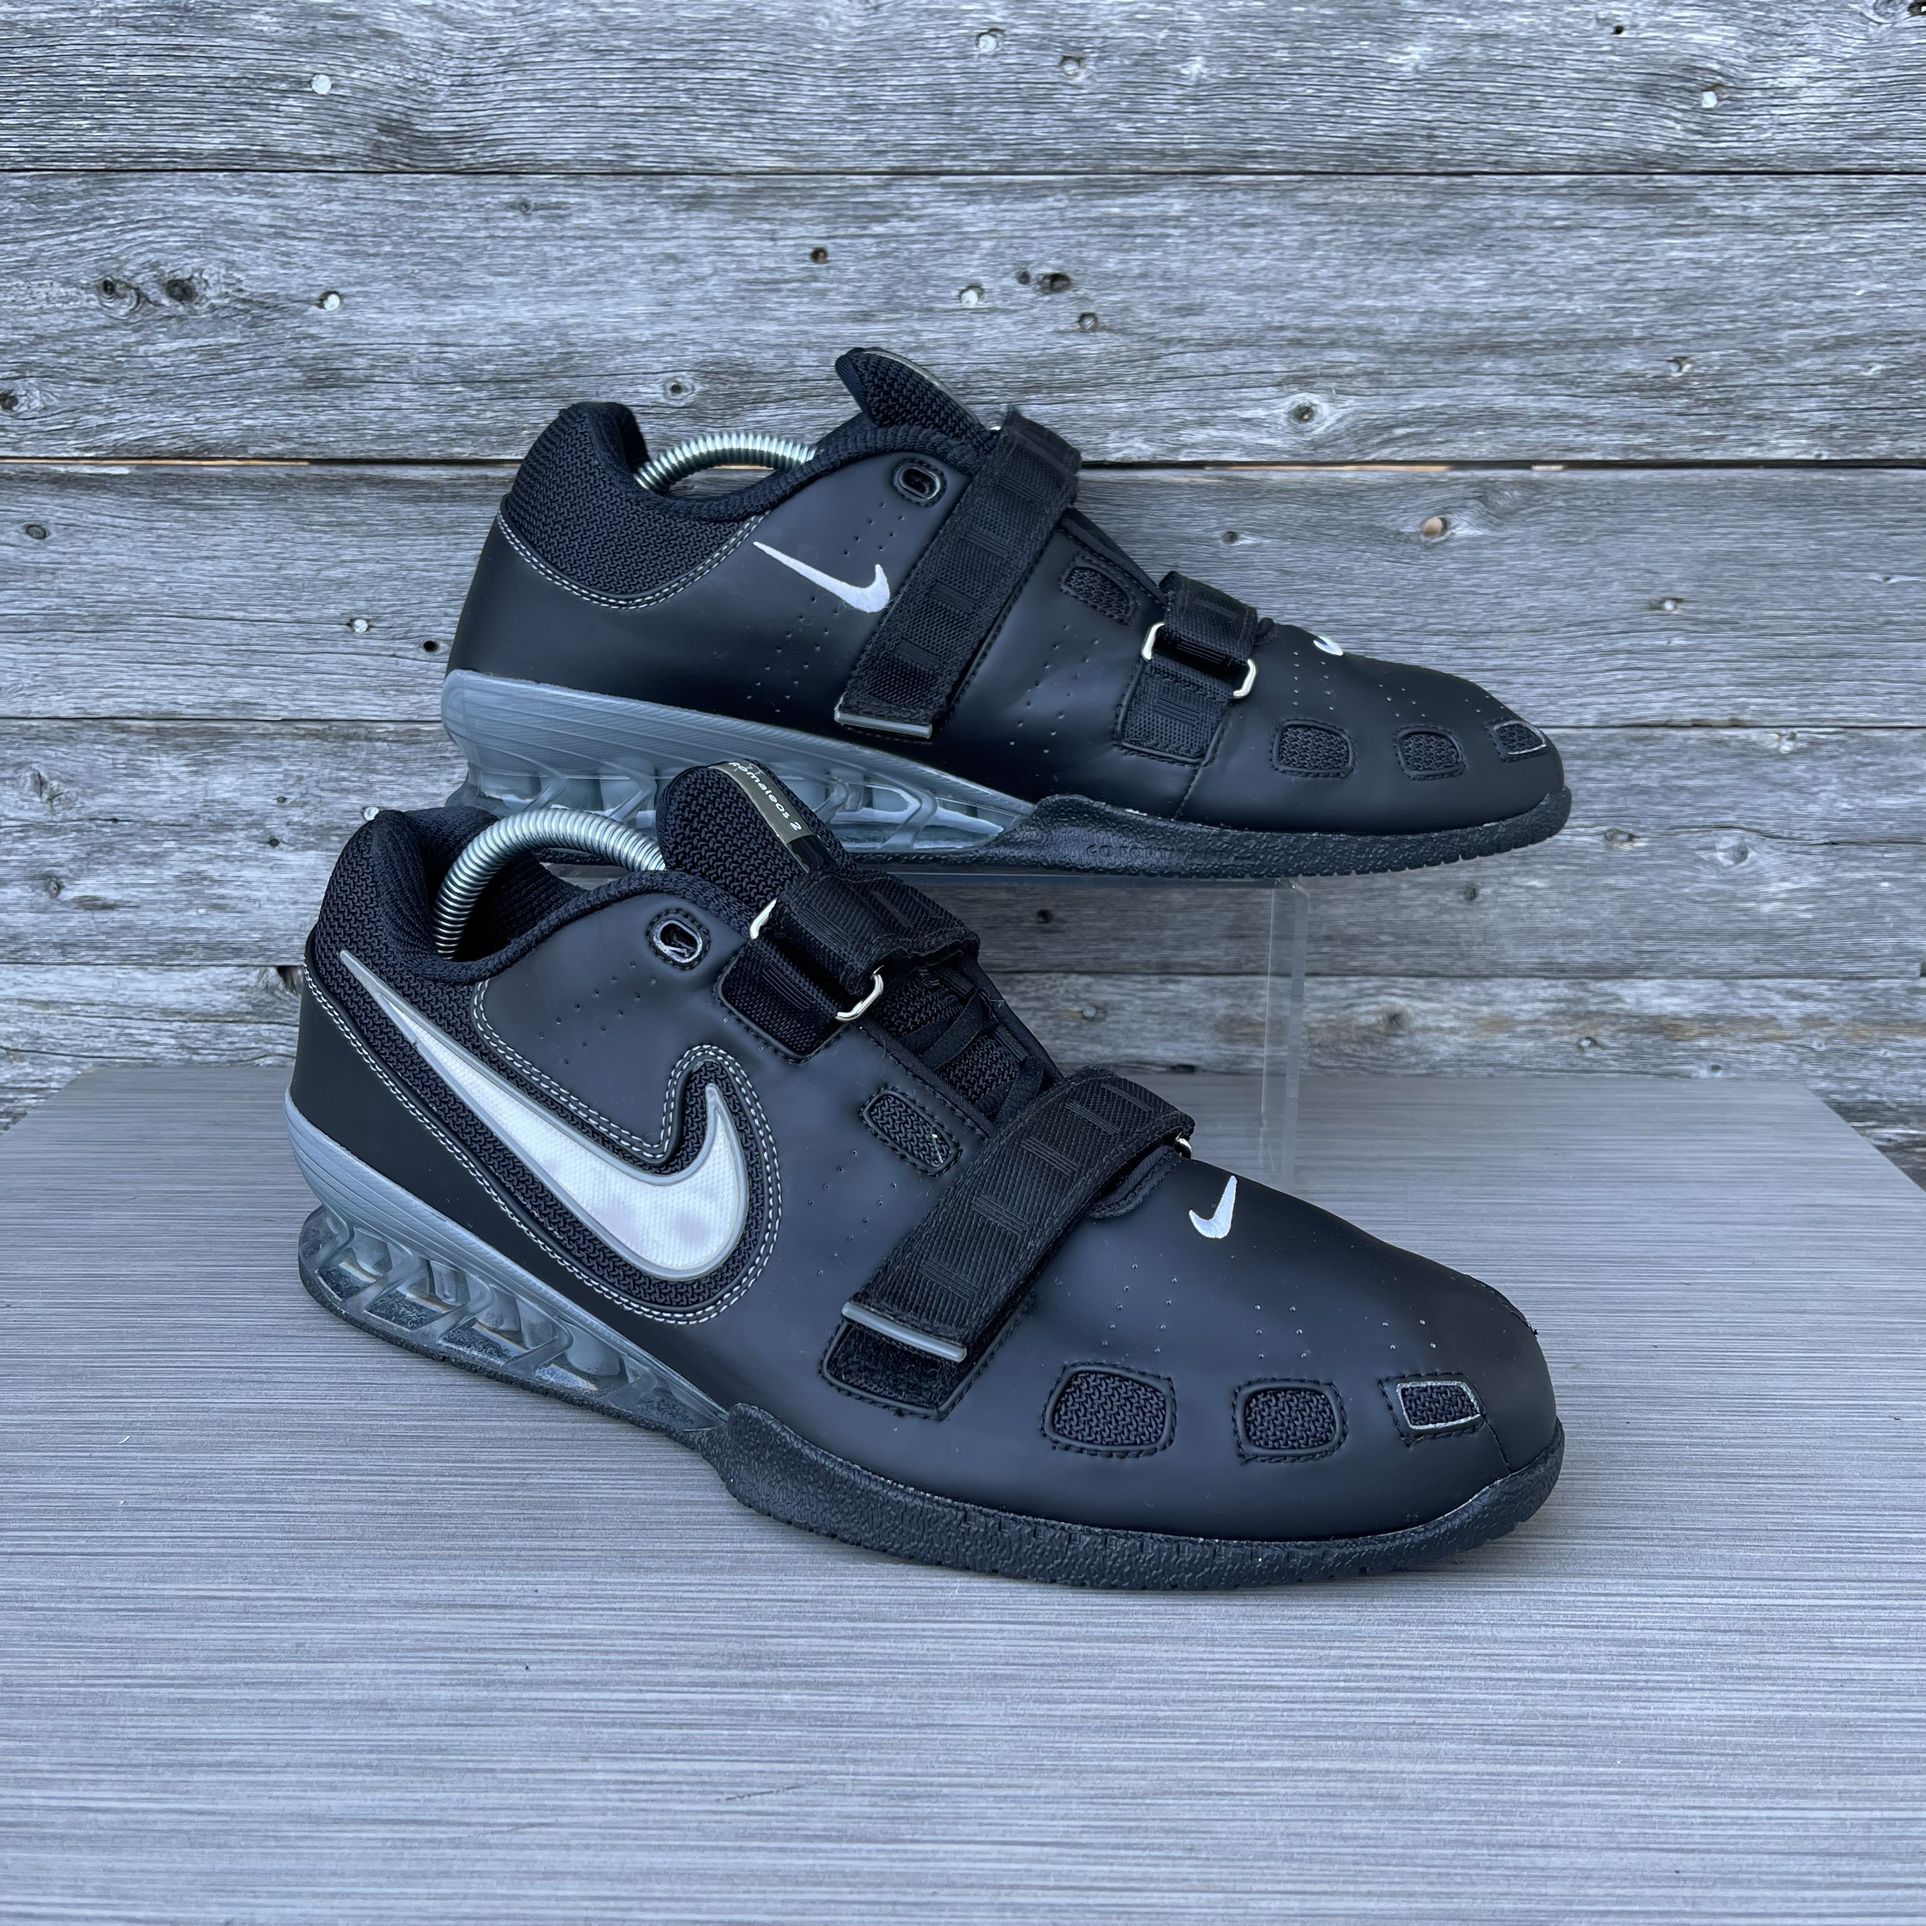 NIKE Romaleos 2 Weightlifting Powerlift Shoes for Sale in TX - OfferUp